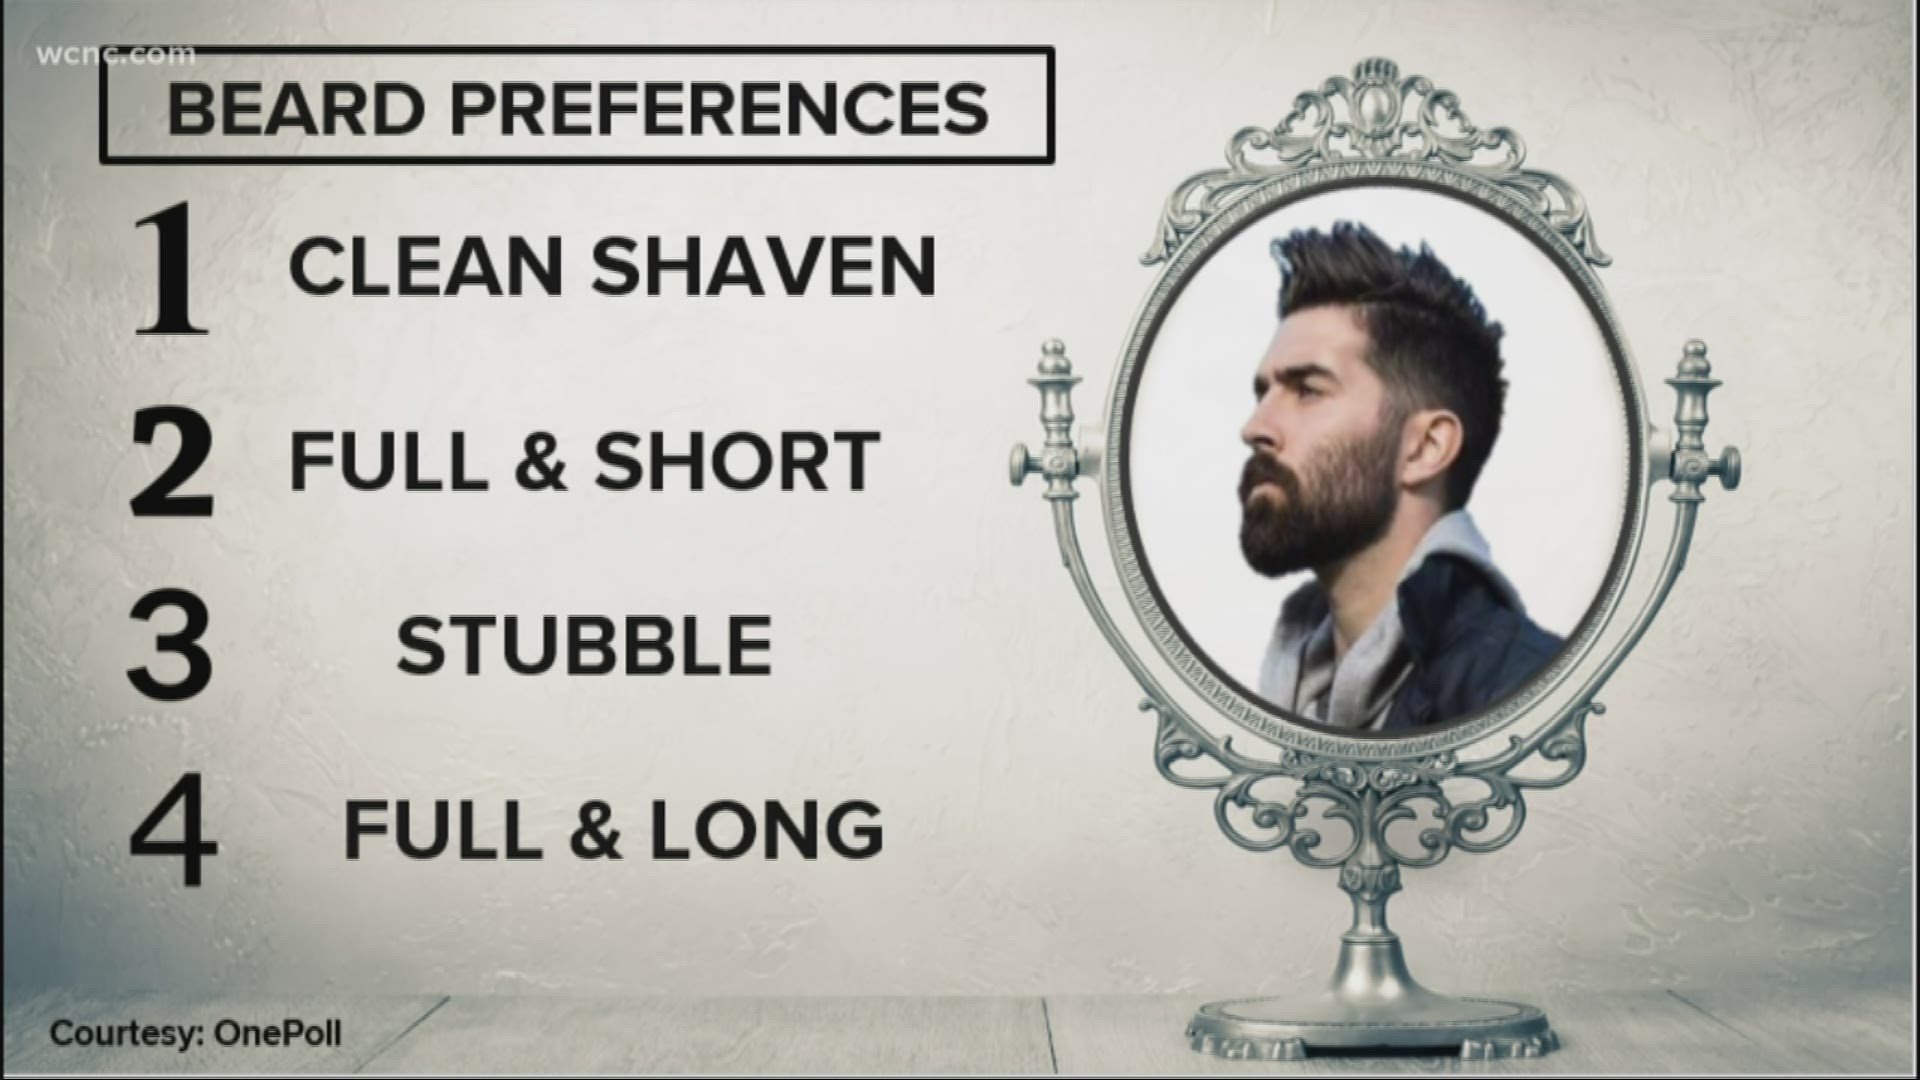 Grab your razors, guys, because according to a new survey, clean shaven men are the best looking. The least attractive? Full, long beards.